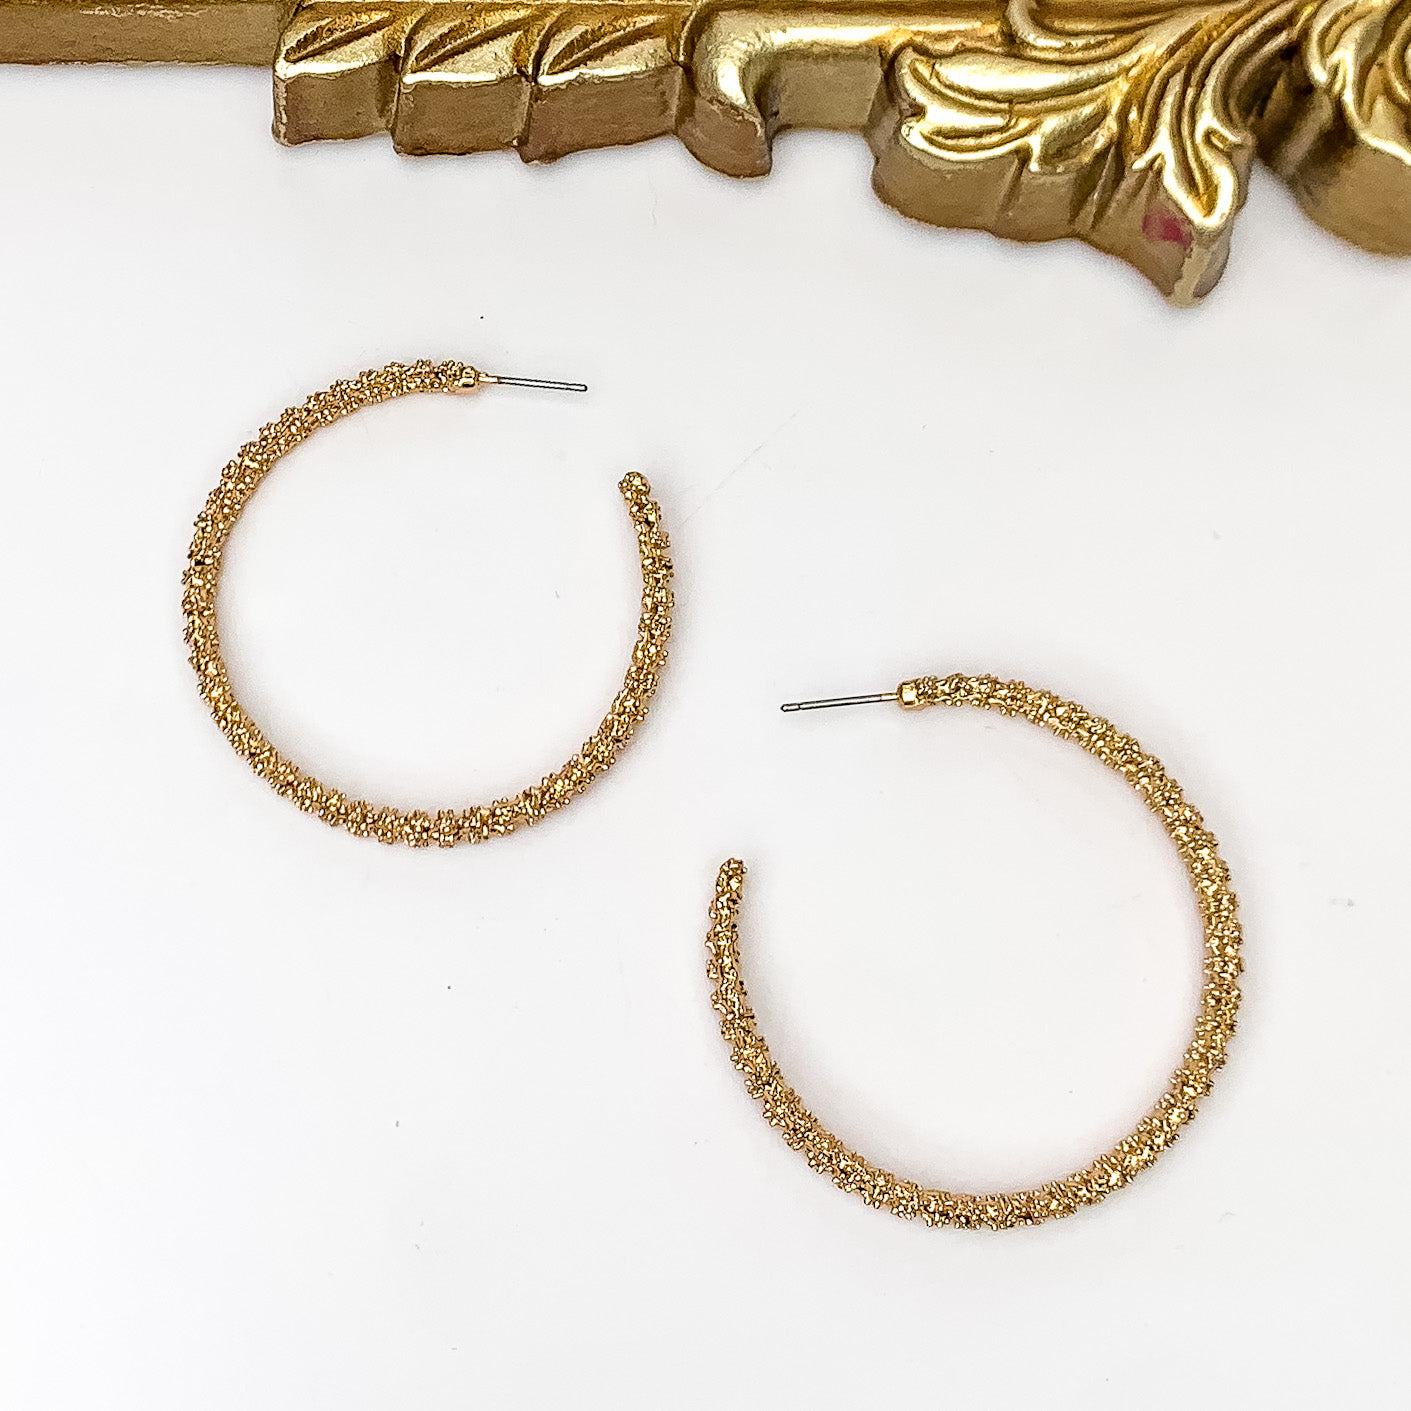 Worry Free Large Gold Tone Textured Hoop Earrings - Giddy Up Glamour Boutique